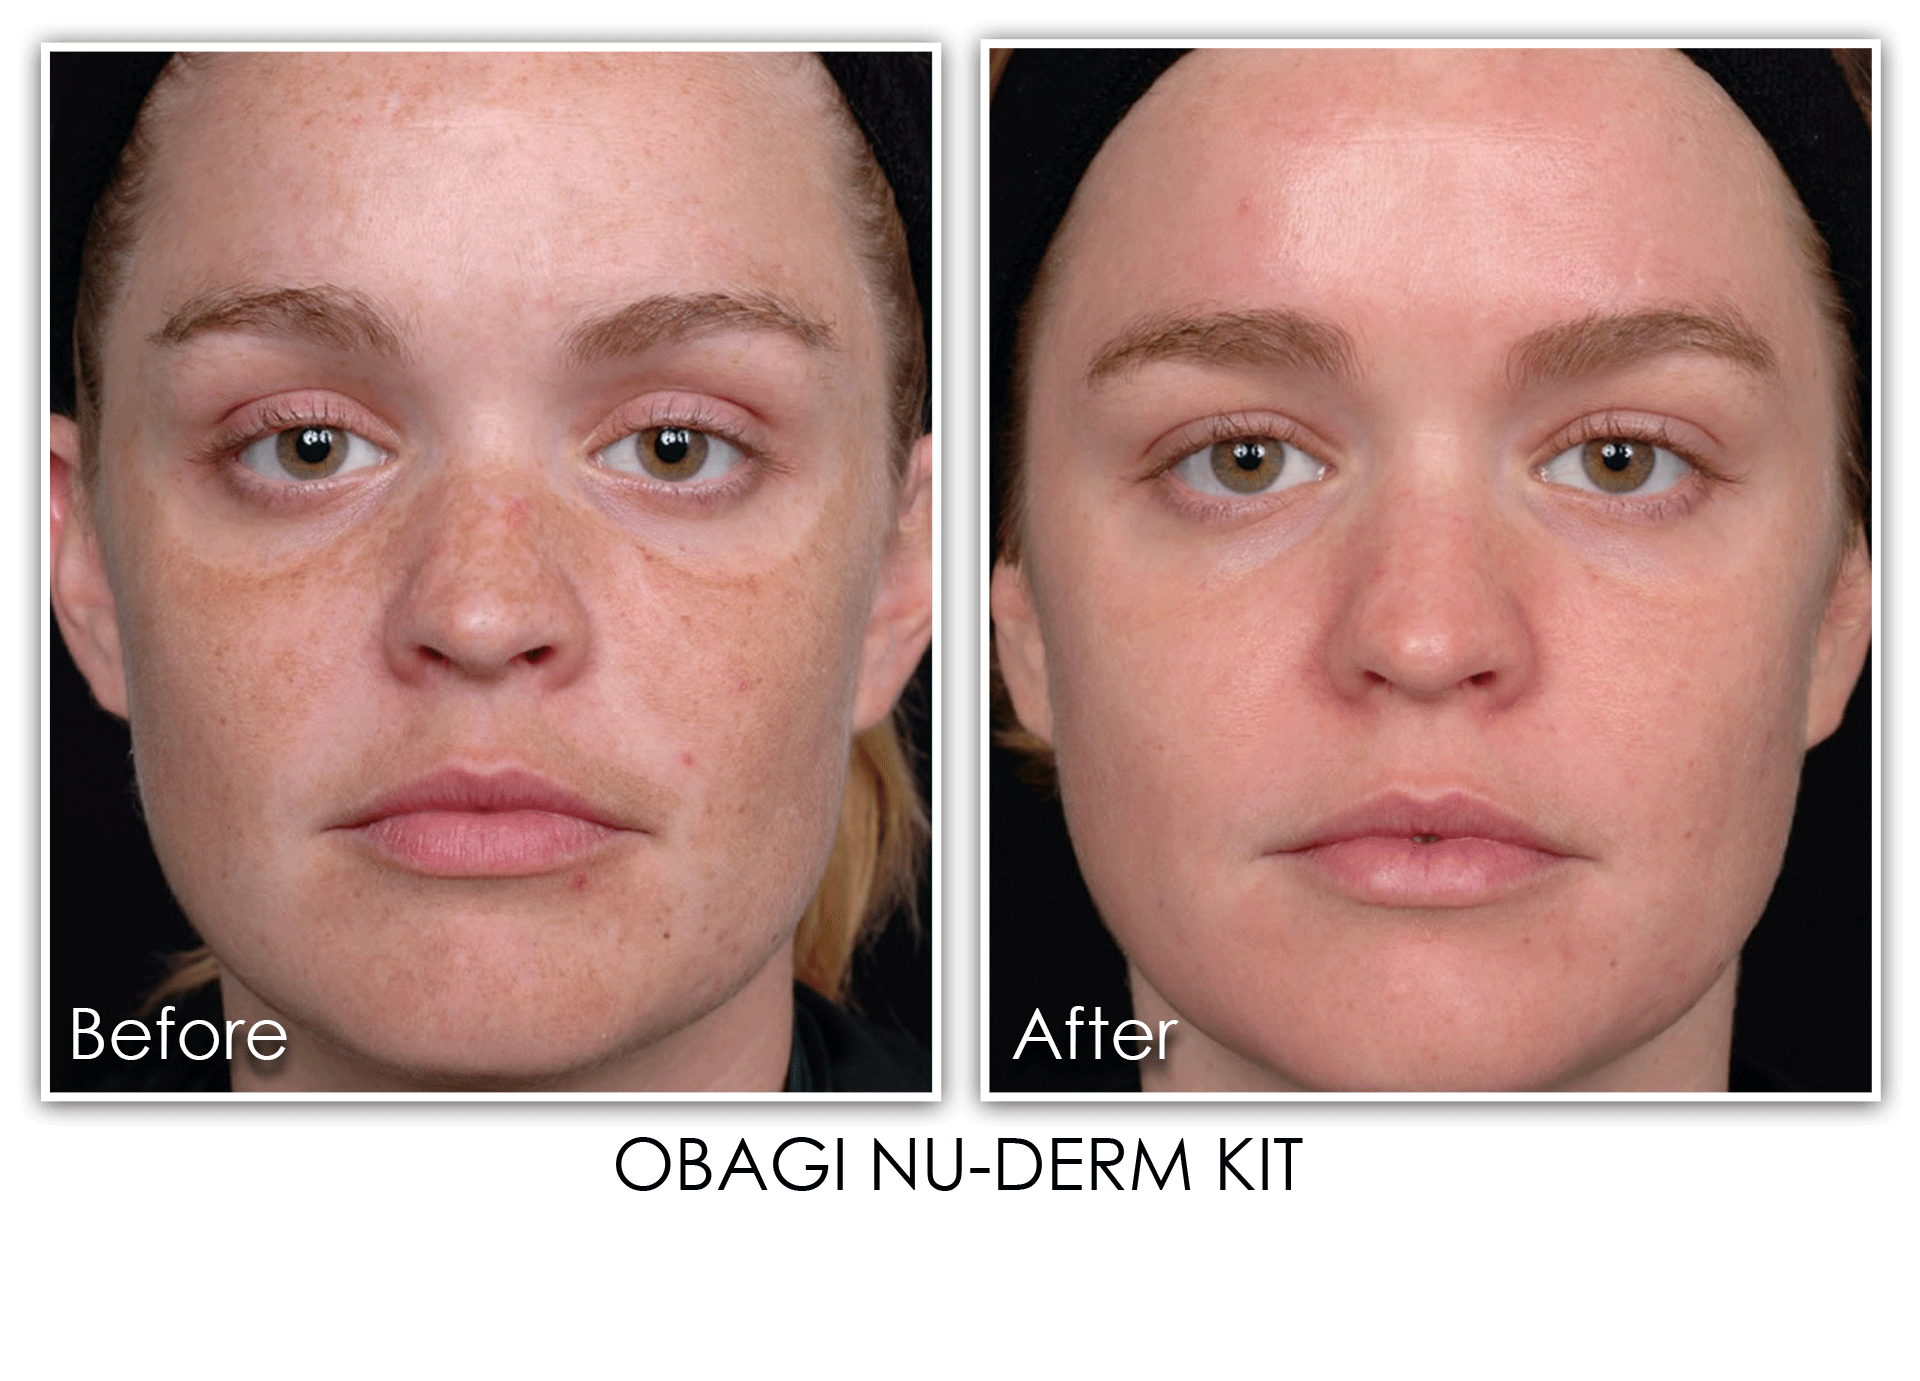 Woman before and after Obagi NU-DERM Kit Treatment